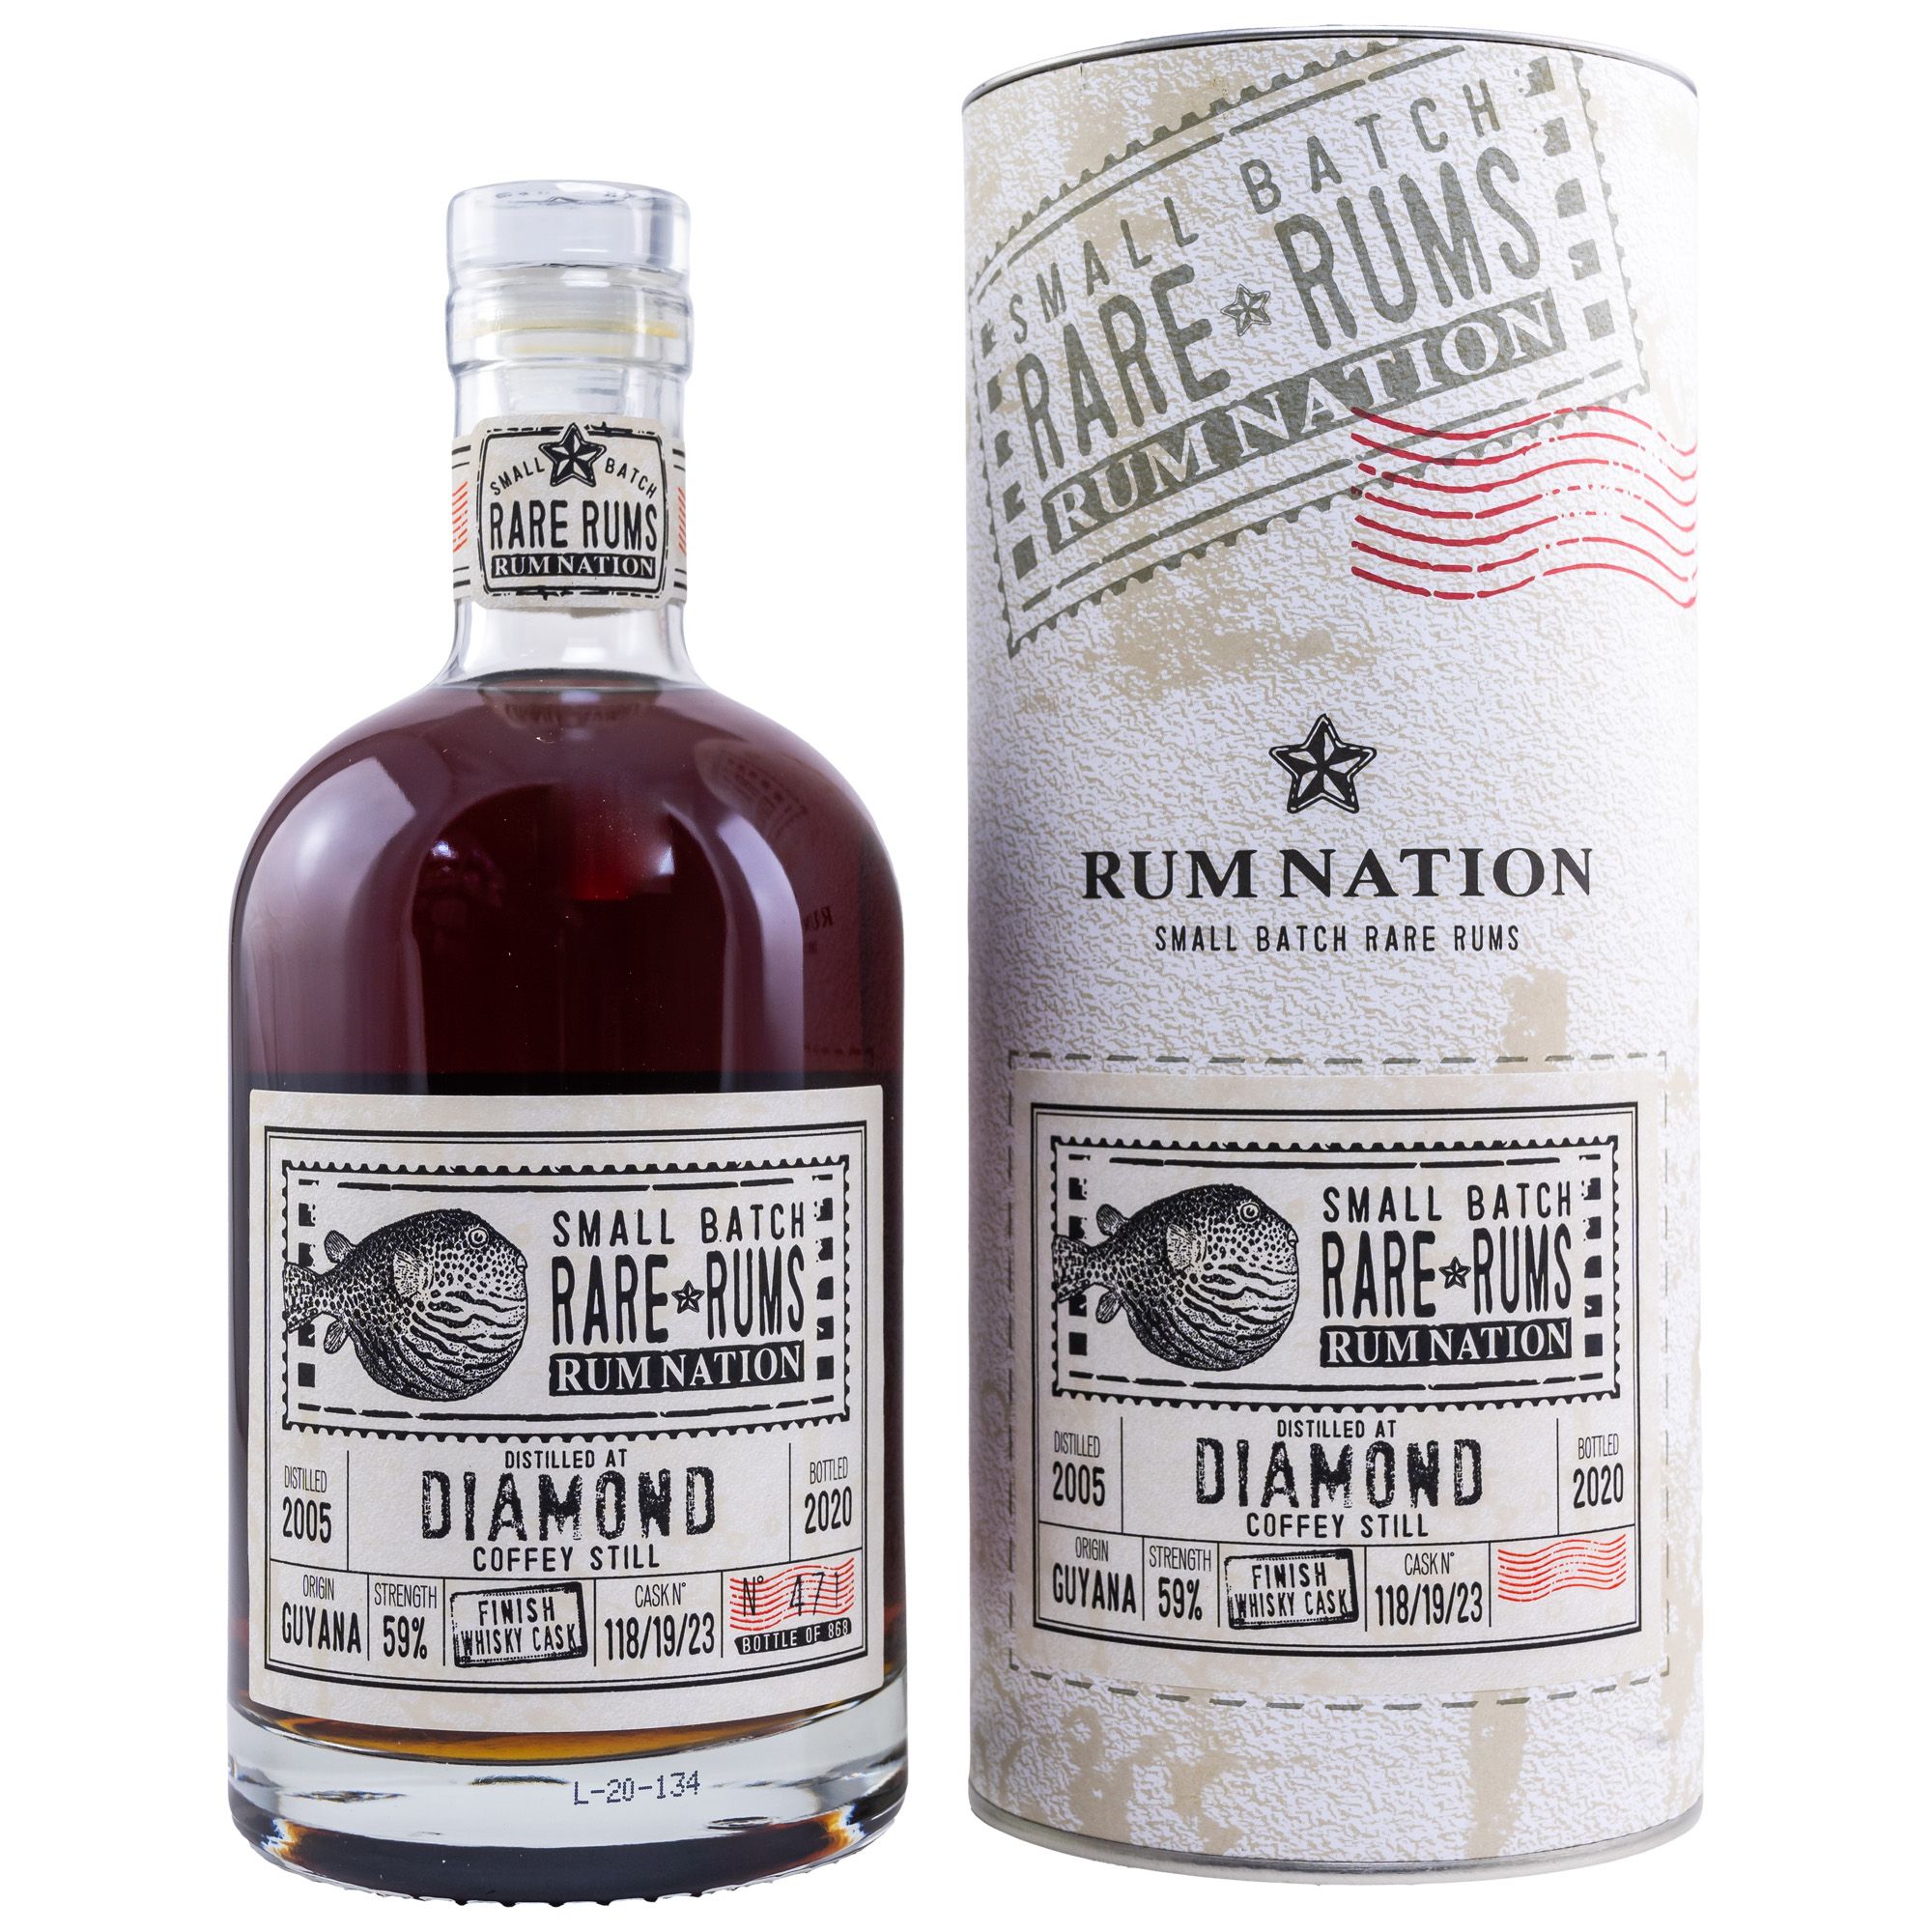 Diamond SV 15 Years Whisky Finish Rum Nation Small Batch Rare Rums 59% 0,7l